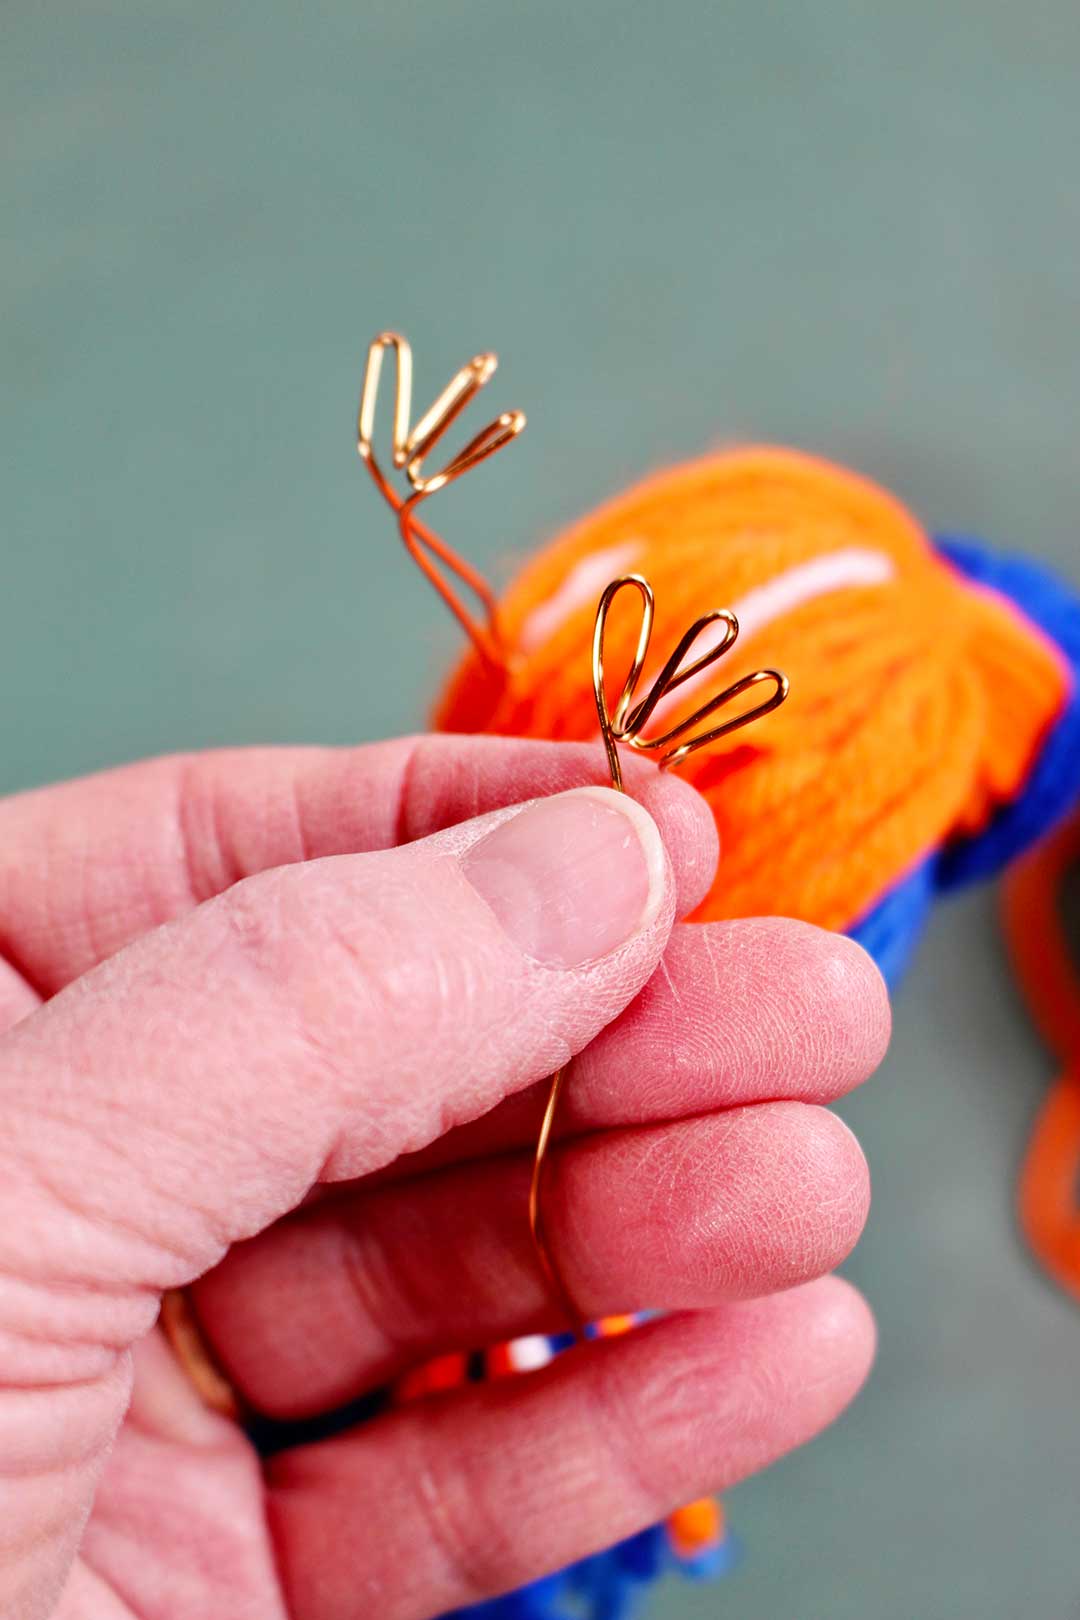 Copper wire bent in three loops to create bird feet.